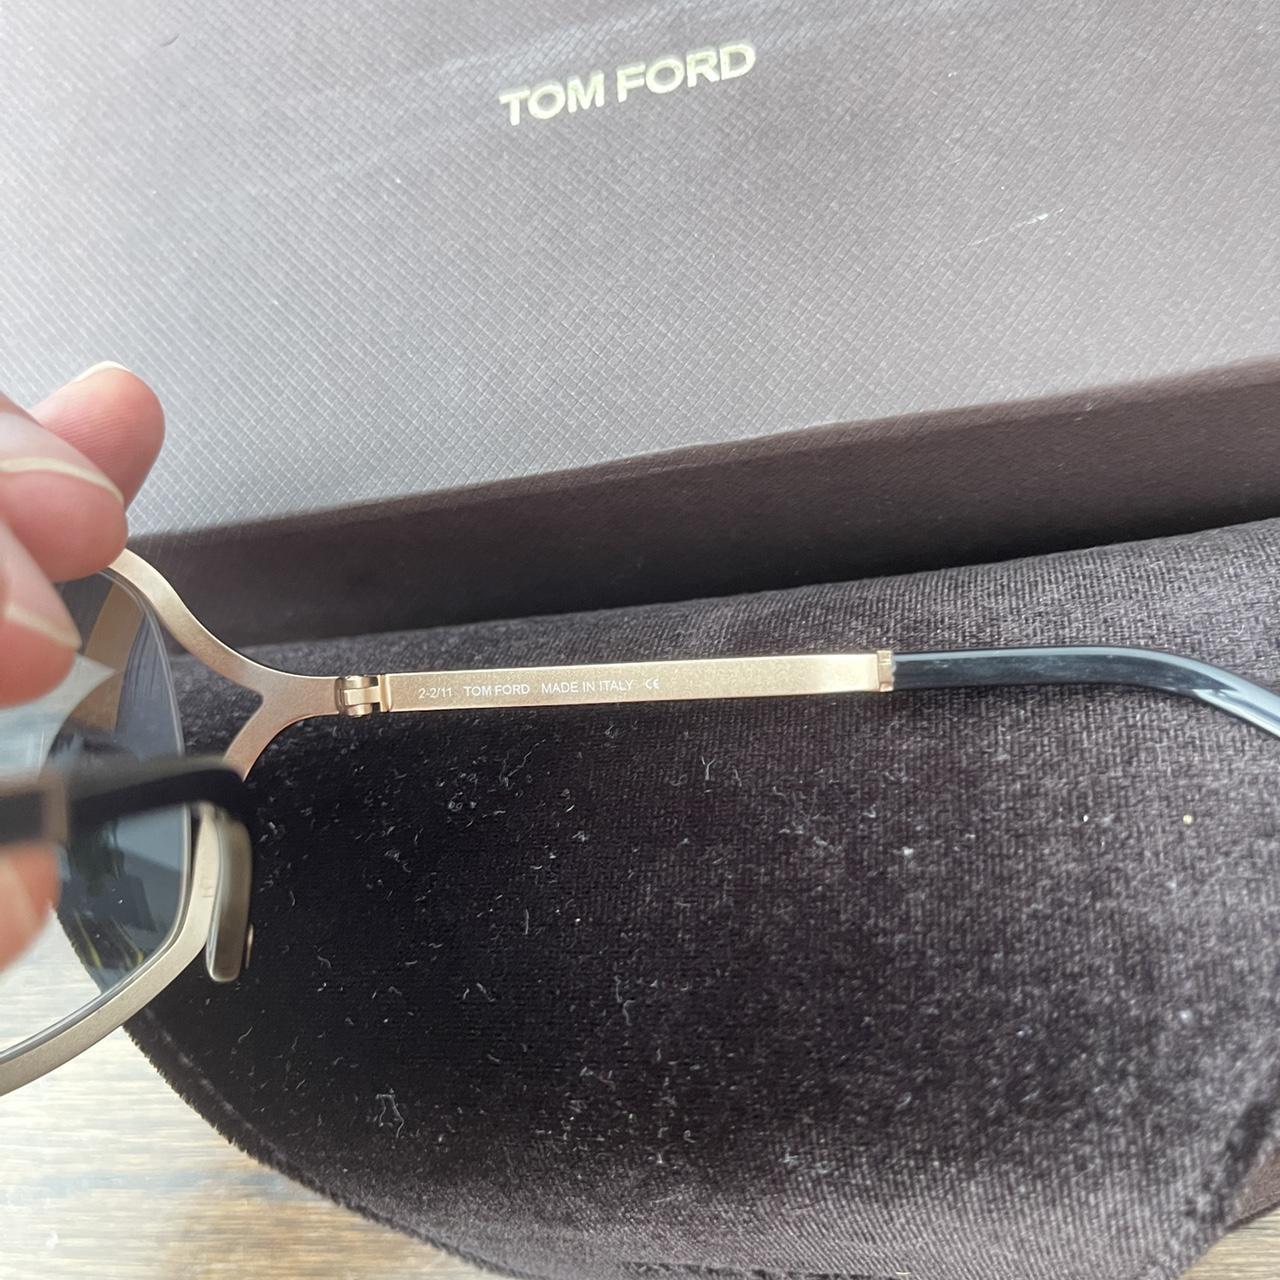 Product Image 3 - Brand new Tom Ford Rickie